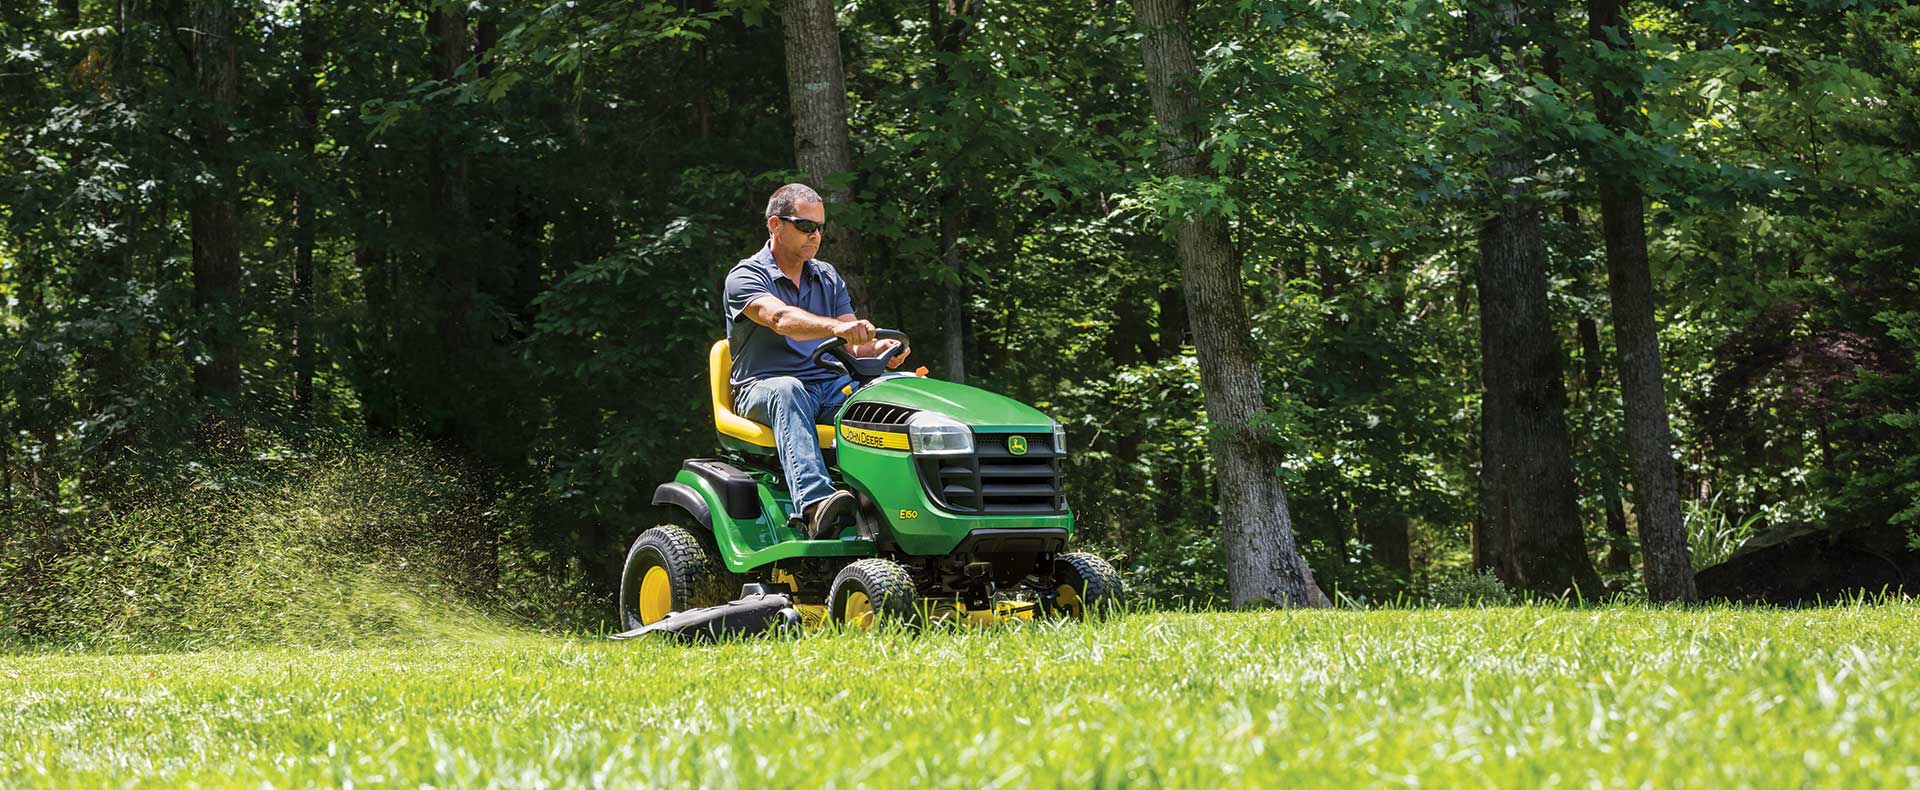 4 Tips for Buying Your First Riding Lawn Mower